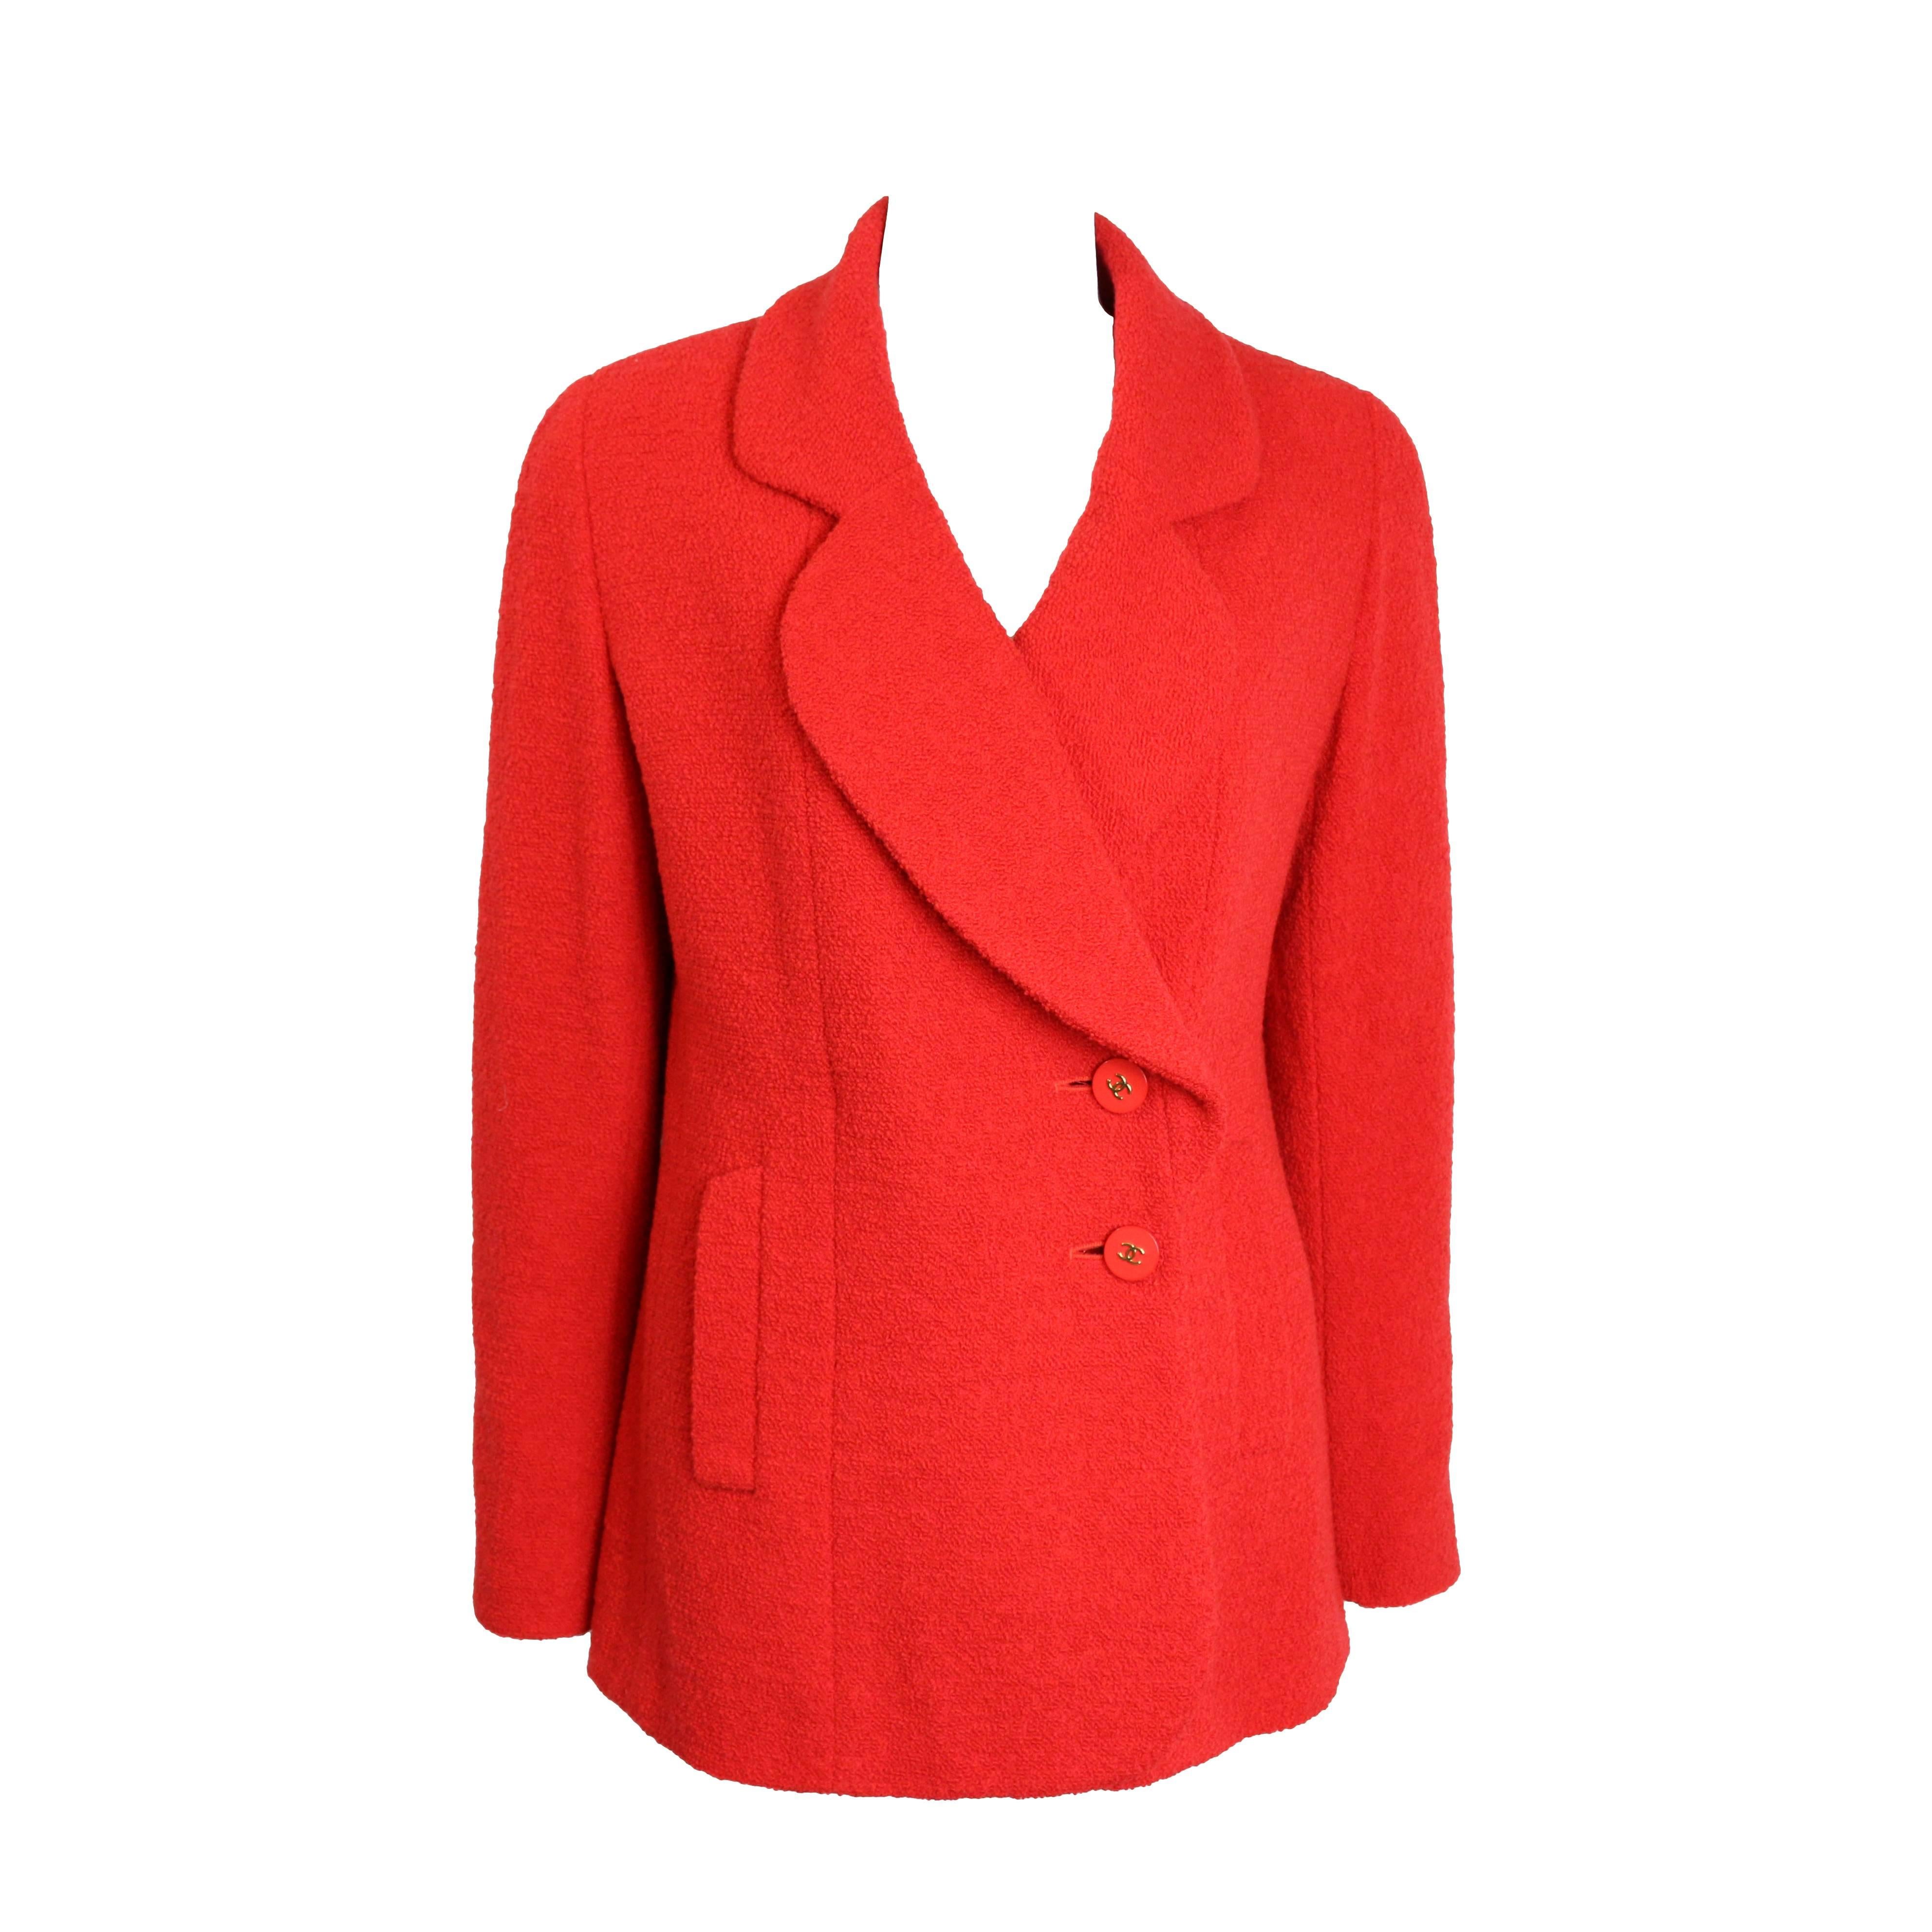 Vintage Fall 1994 Chanel Red Boucle Wool Jacket